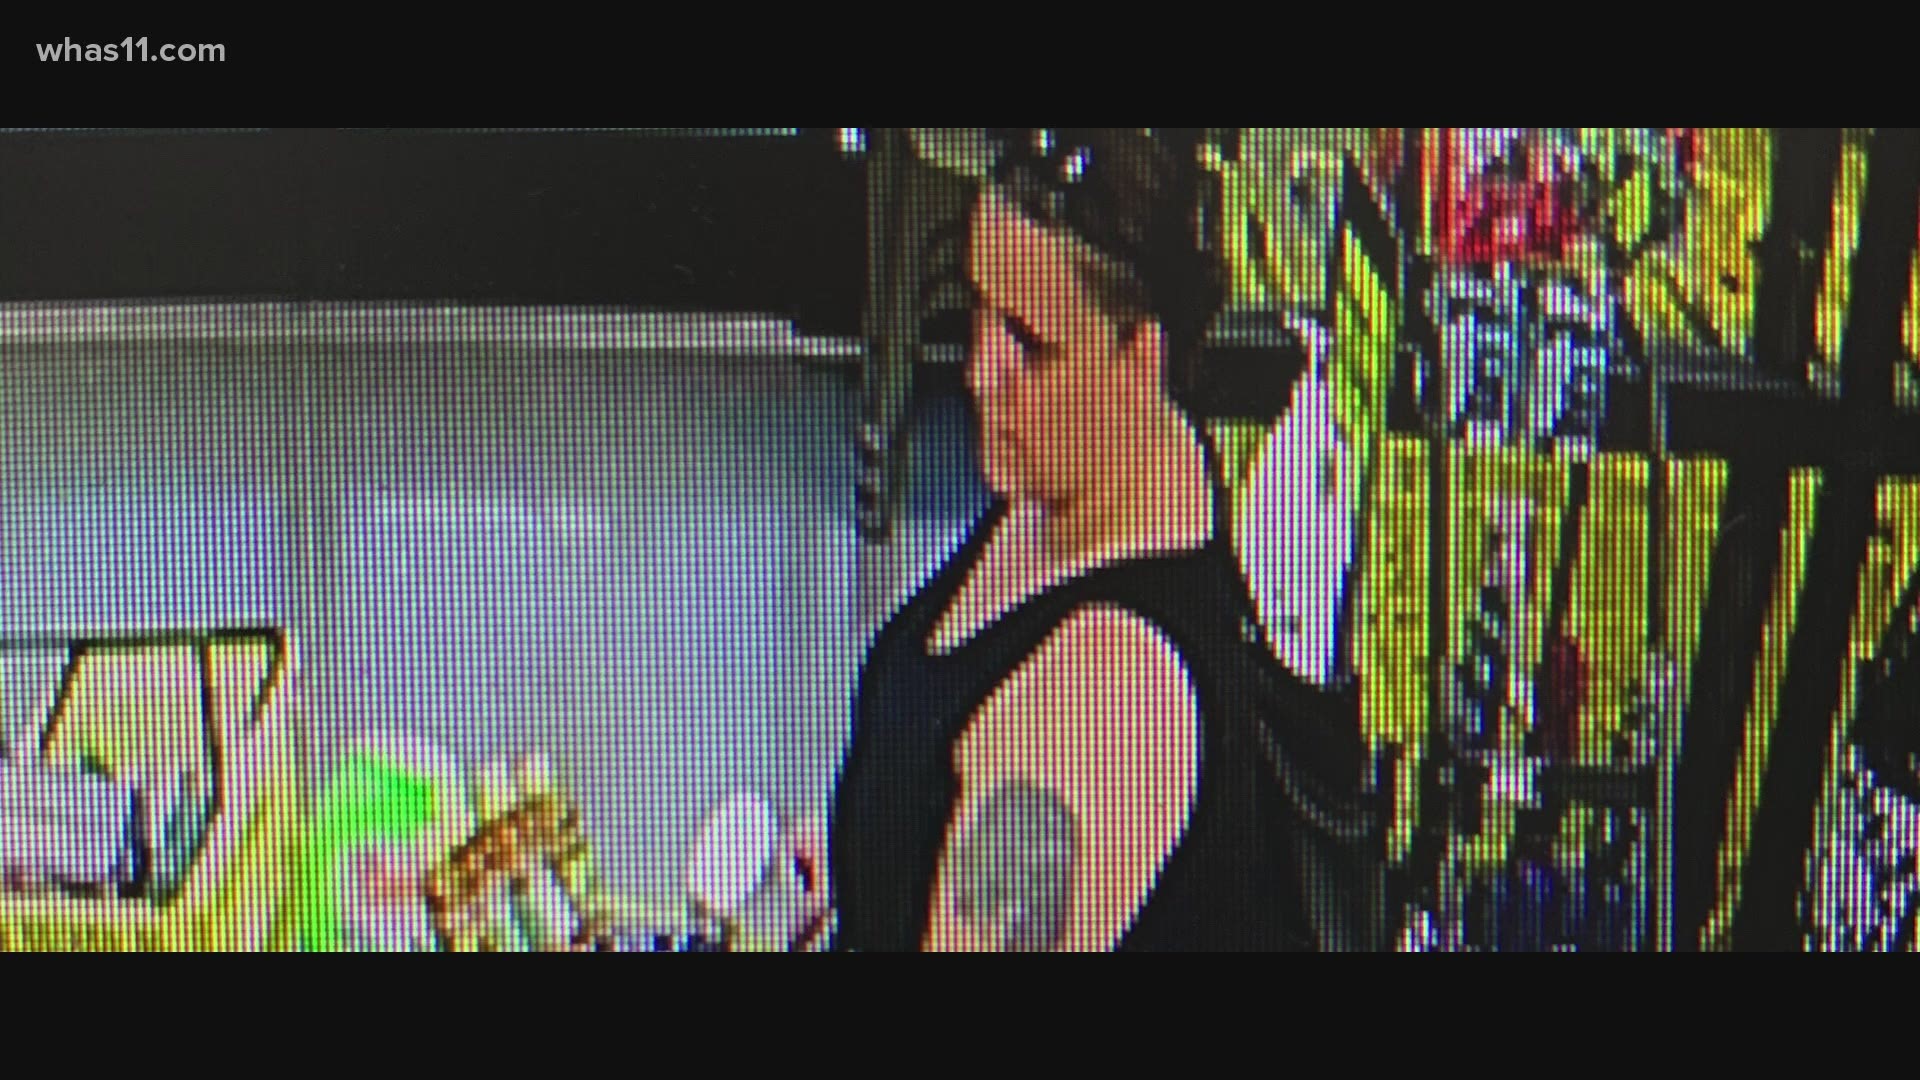 Surveillance footage shows one woman filling a cart with nearly $100 of merchandise and leaving as a second woman distracts an employee.